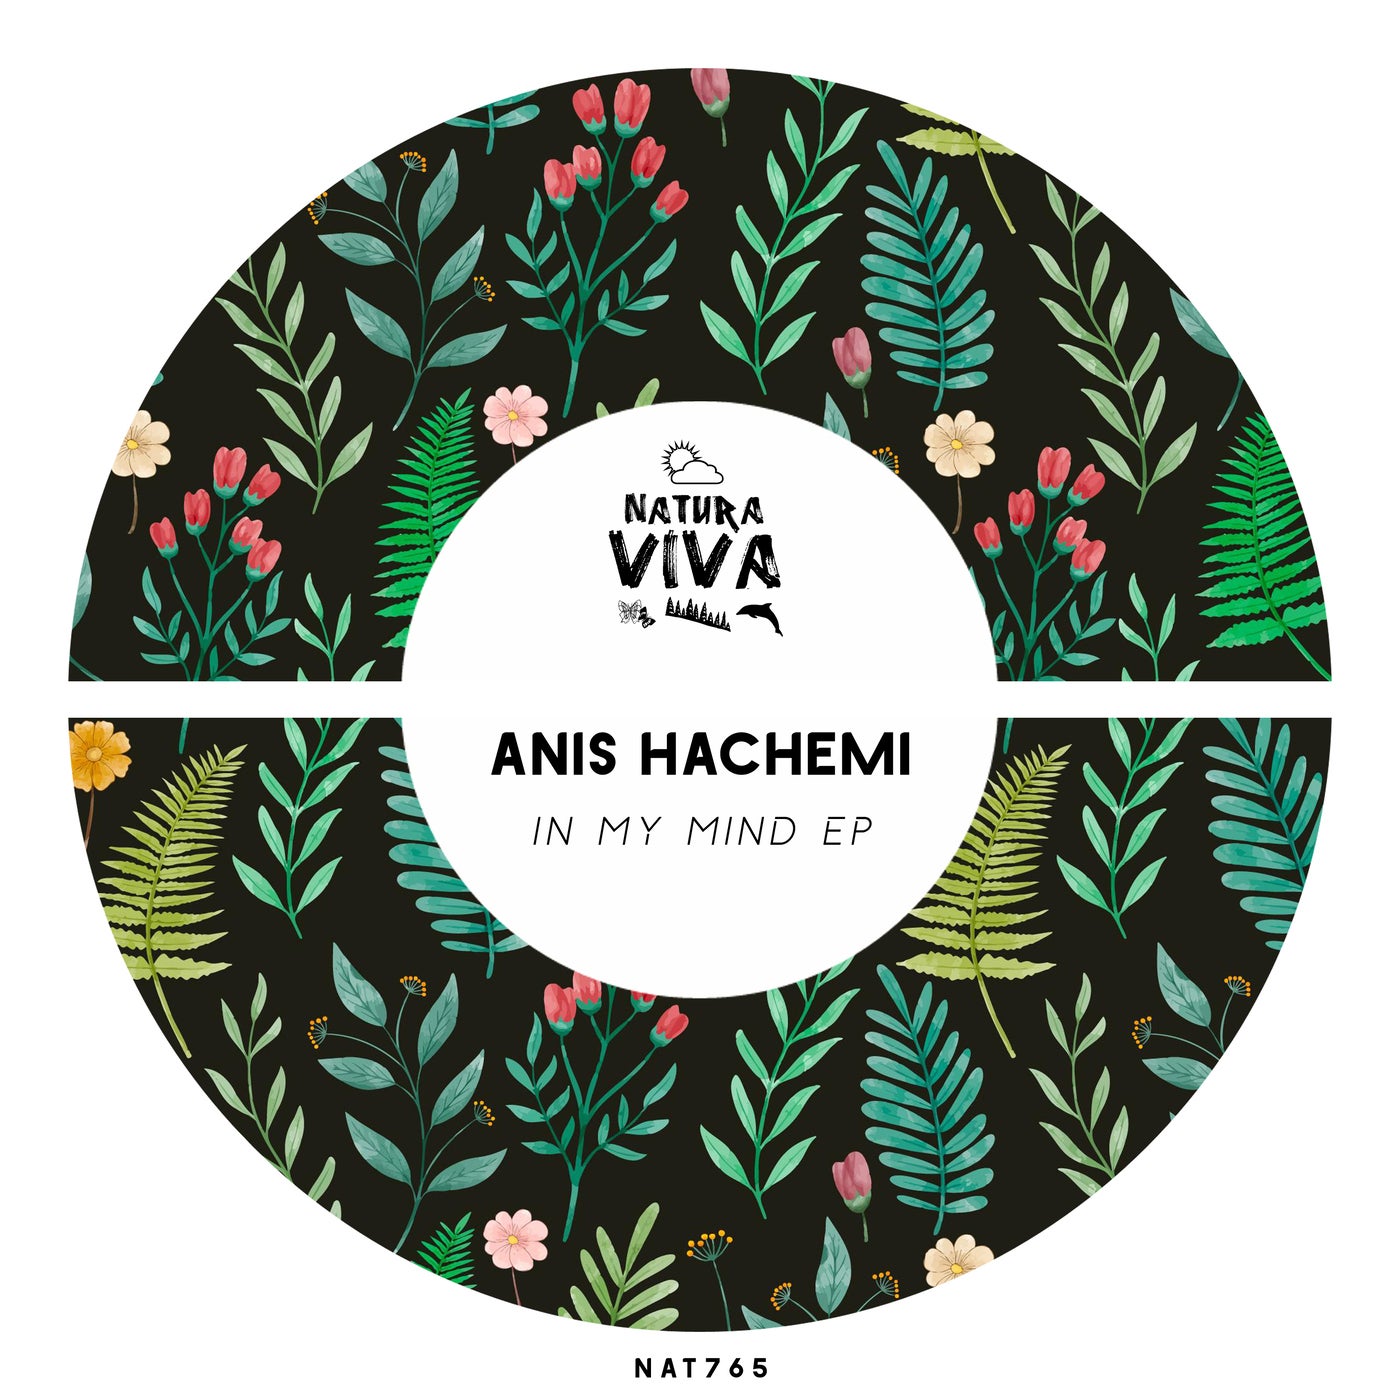 Anis Hachemi – In My Mind Ep [NAT765]